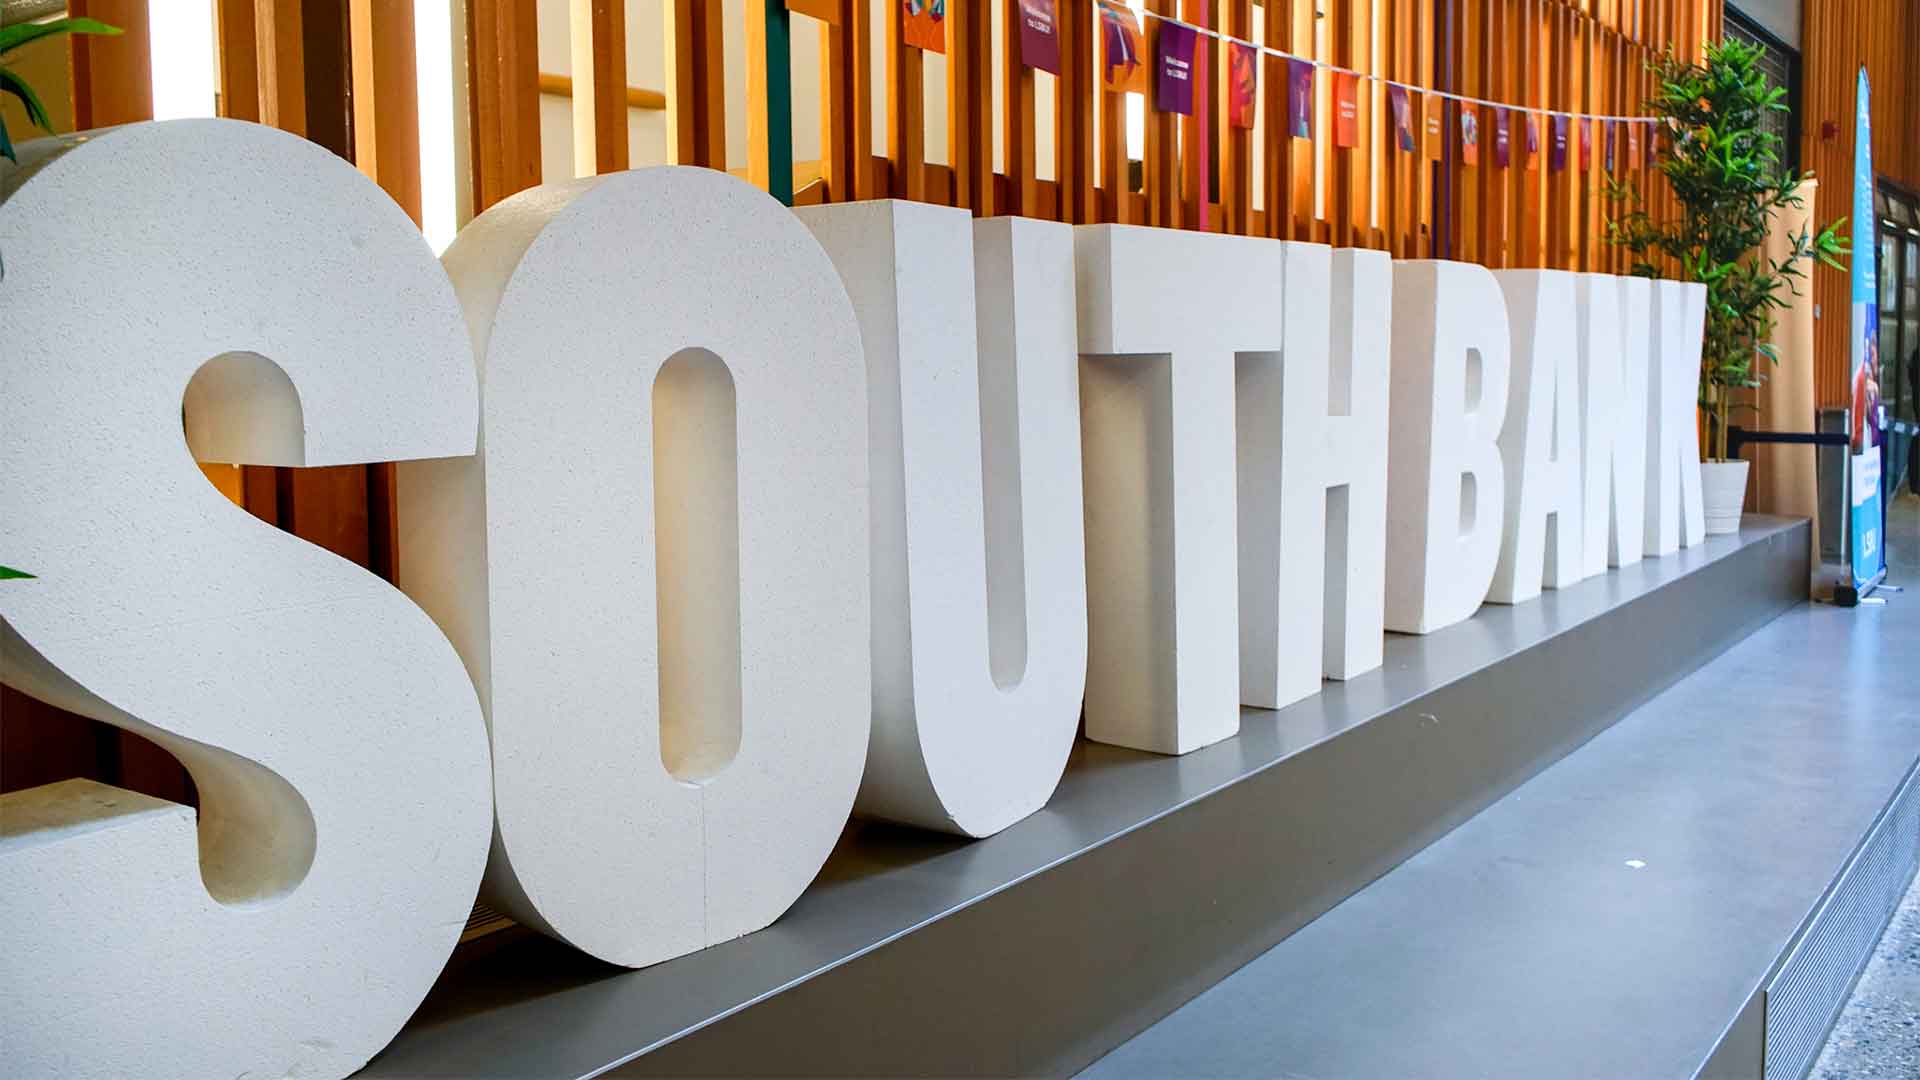 A photograph of giant letters in a University building reading Southbank